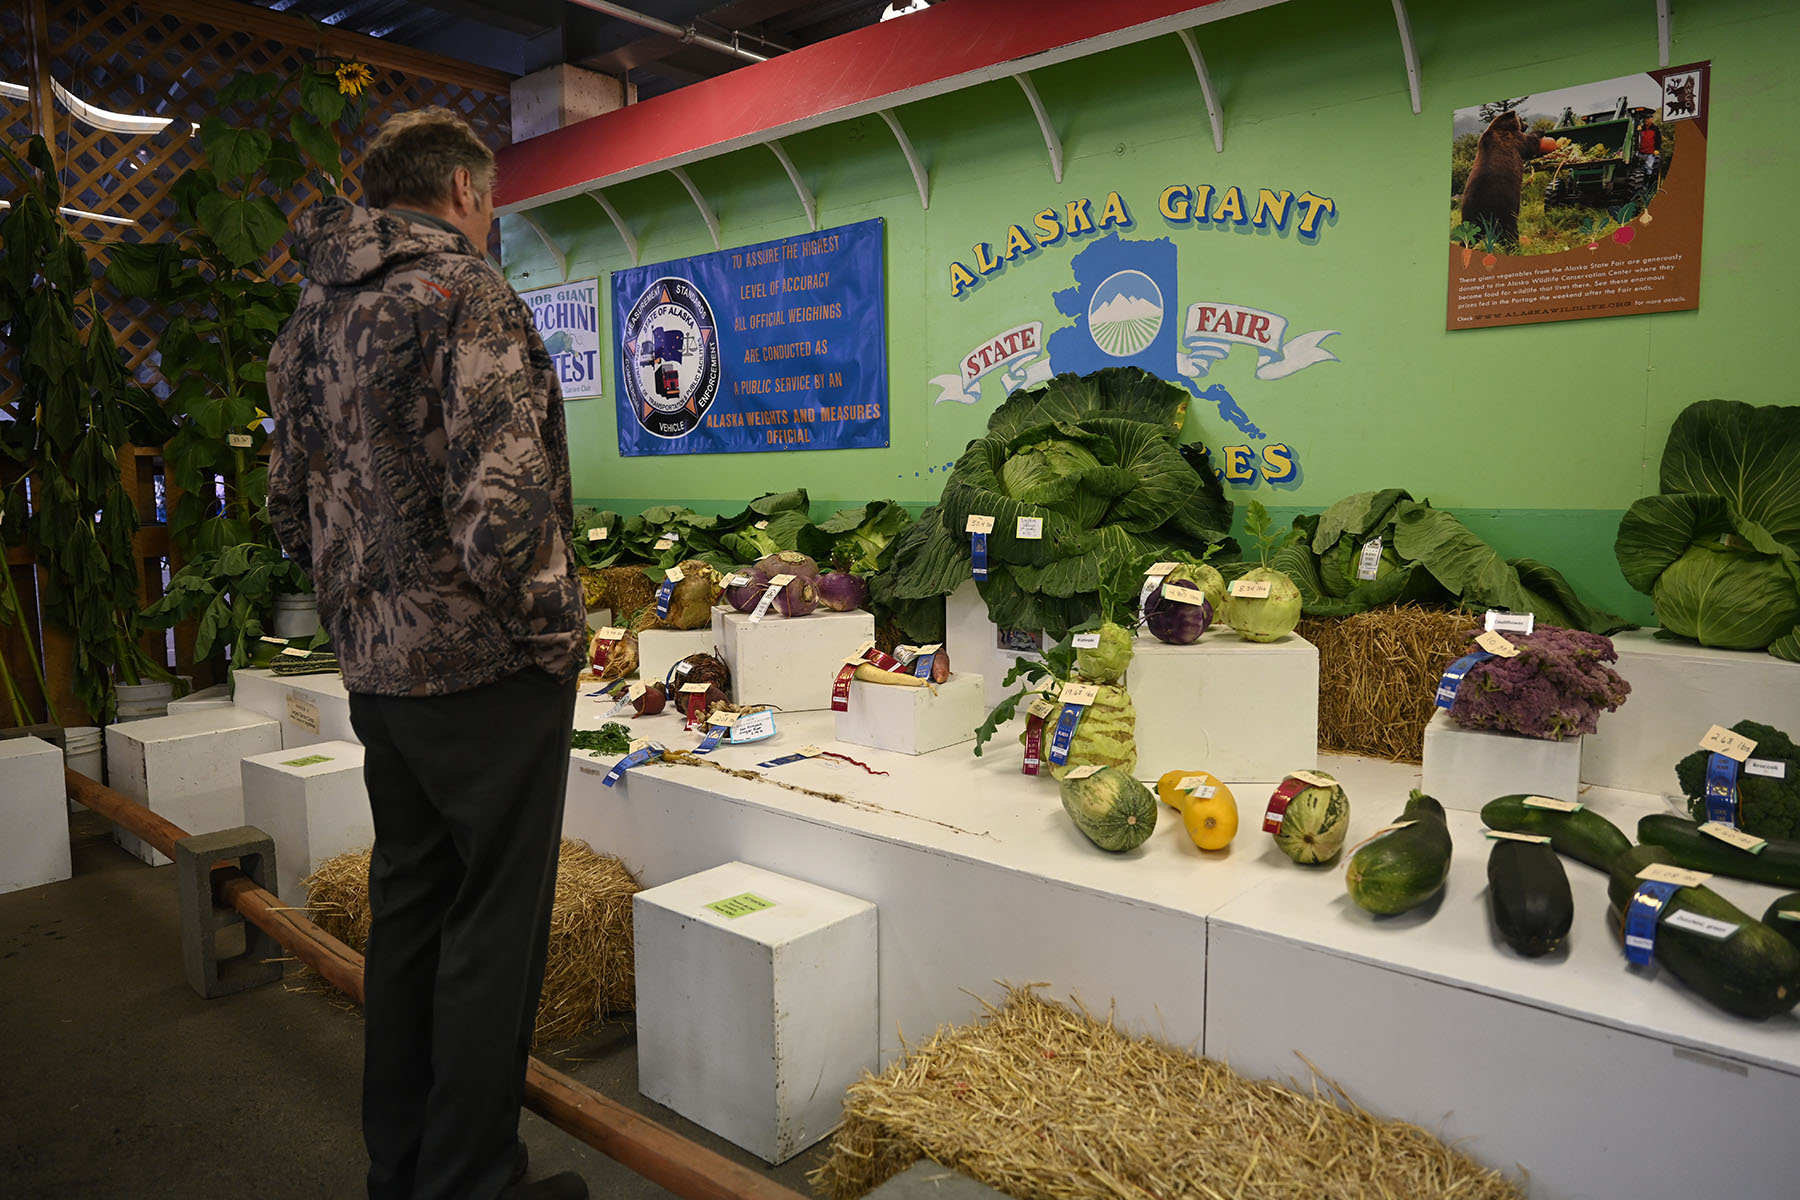 Governor Dunleavy visits the large vegetable exhibit at the Alaska State Fair in 2022